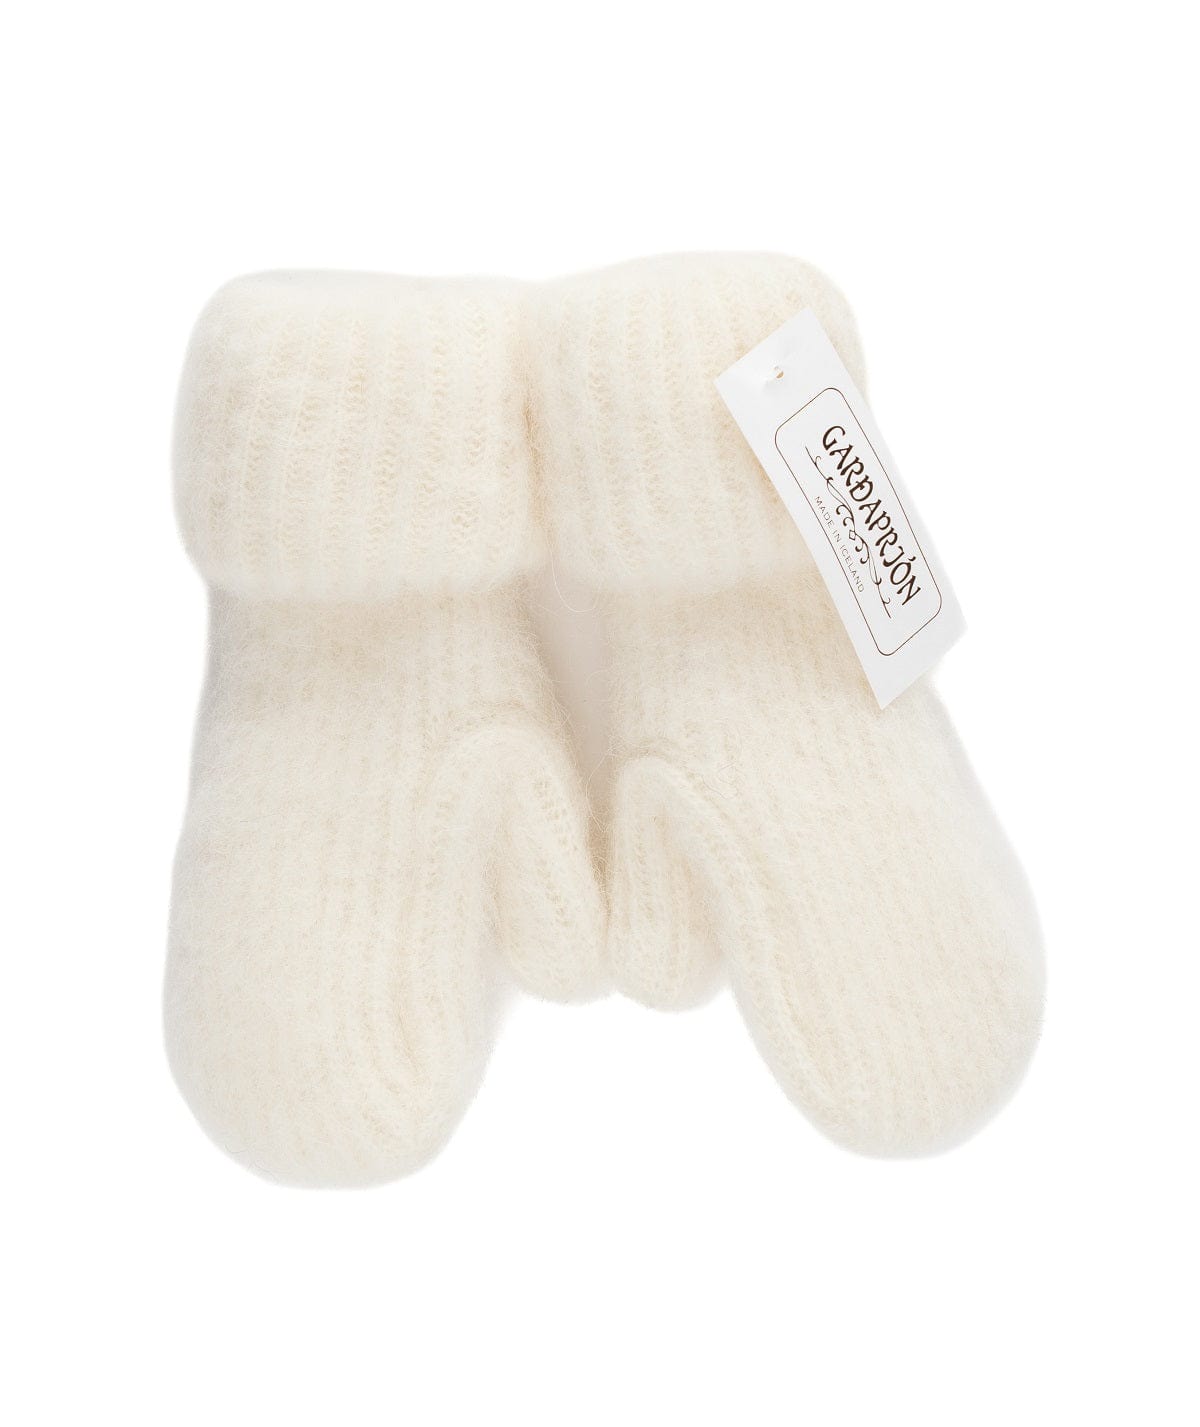 Brushed White Wool Mittens - The Icelandic Store